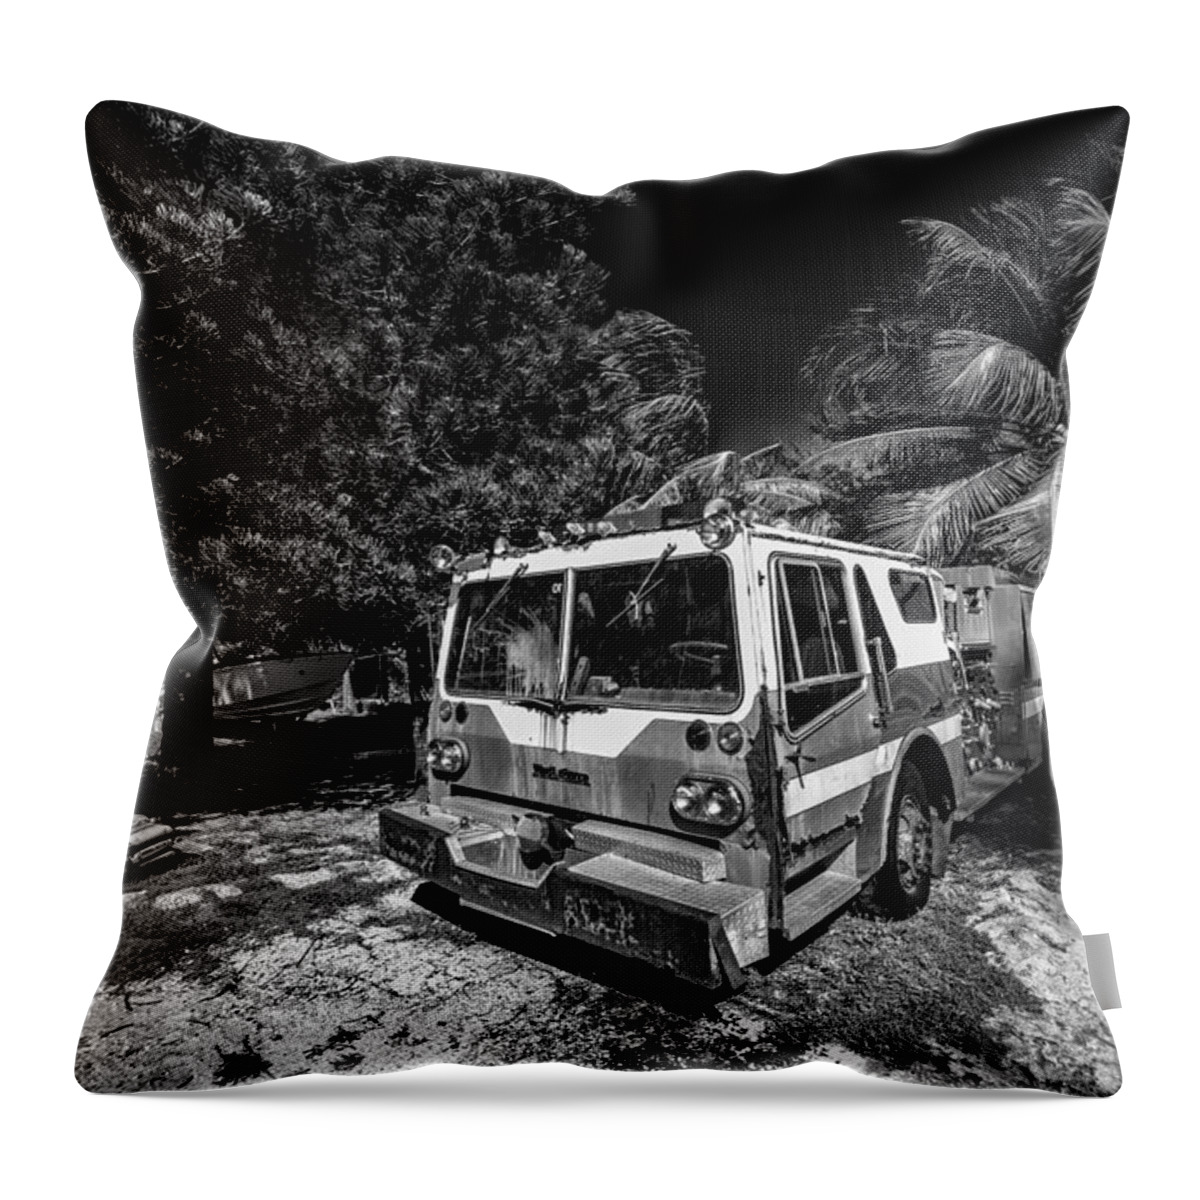 Fire Engine Throw Pillow featuring the photograph Fire Engine Bimini by Kevin Cable